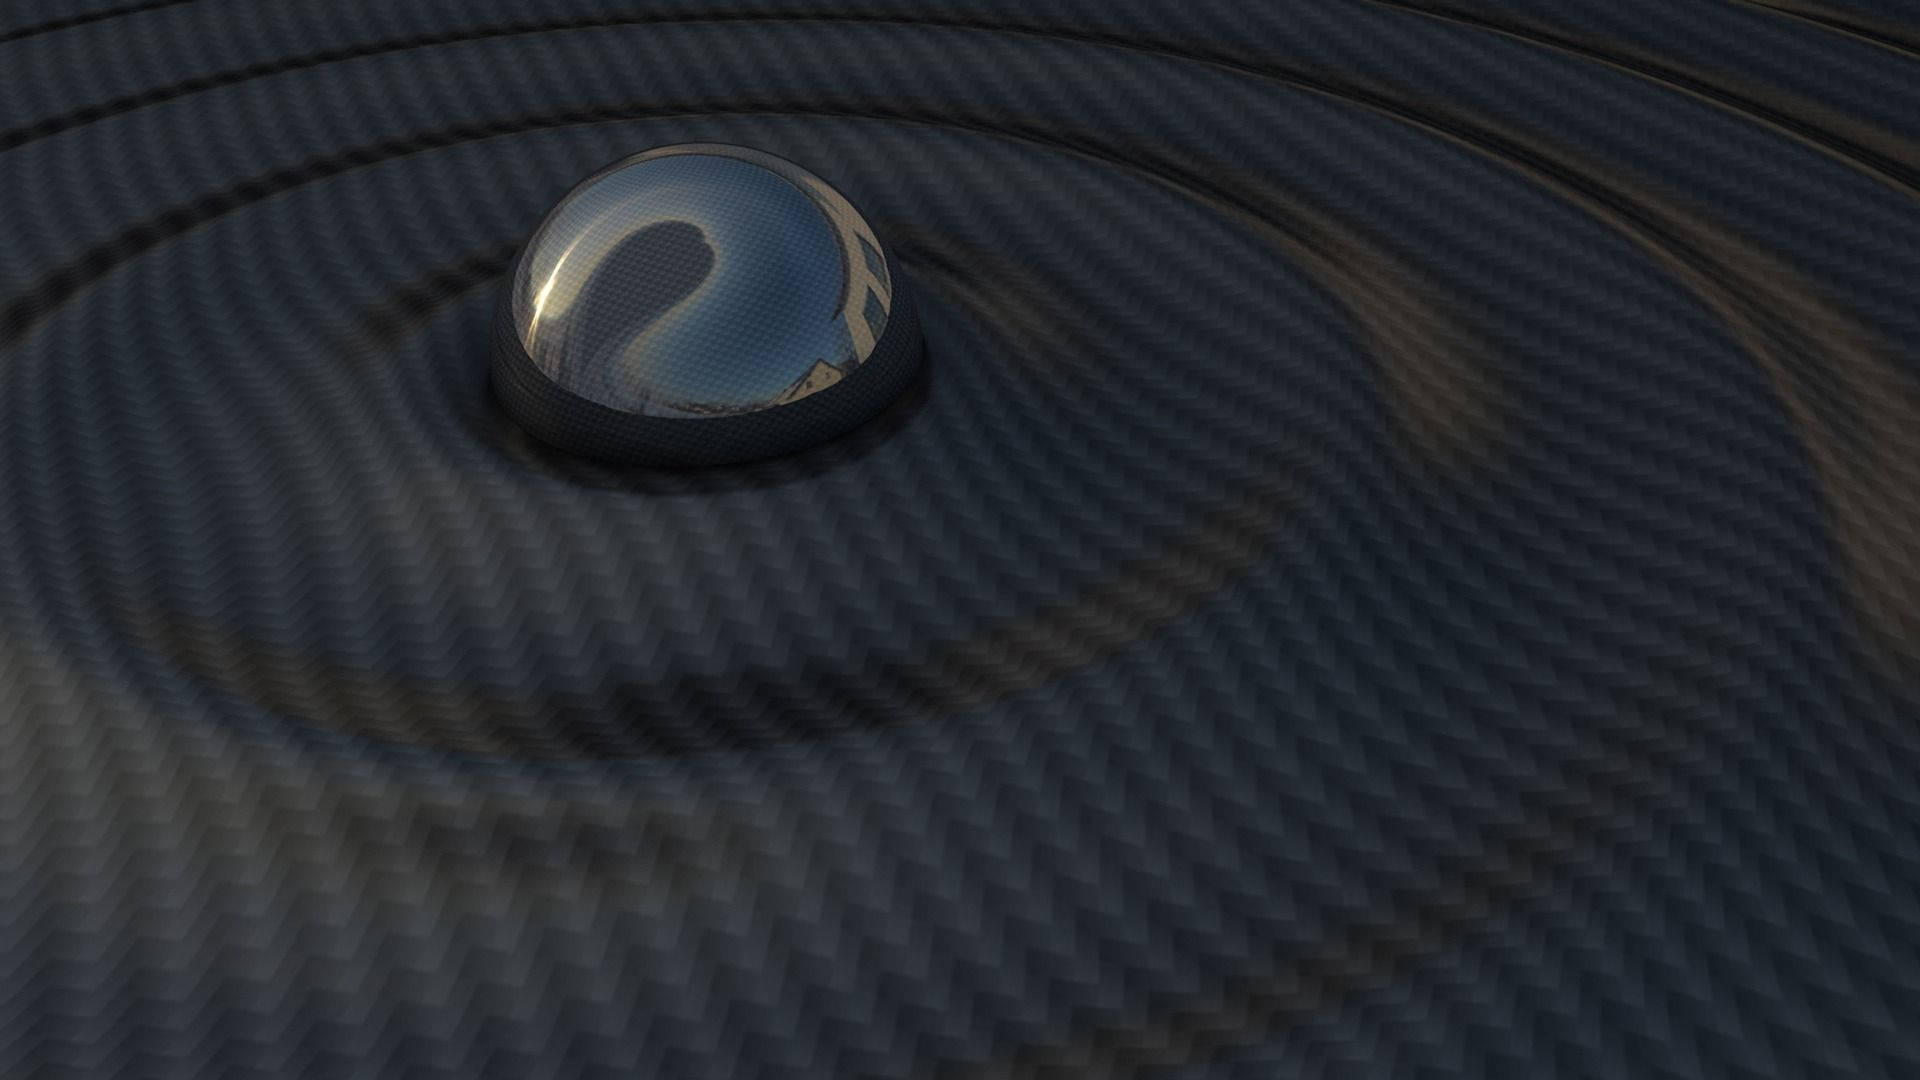 Carbon Fiber 1920X1080 Wallpaper and Background Image